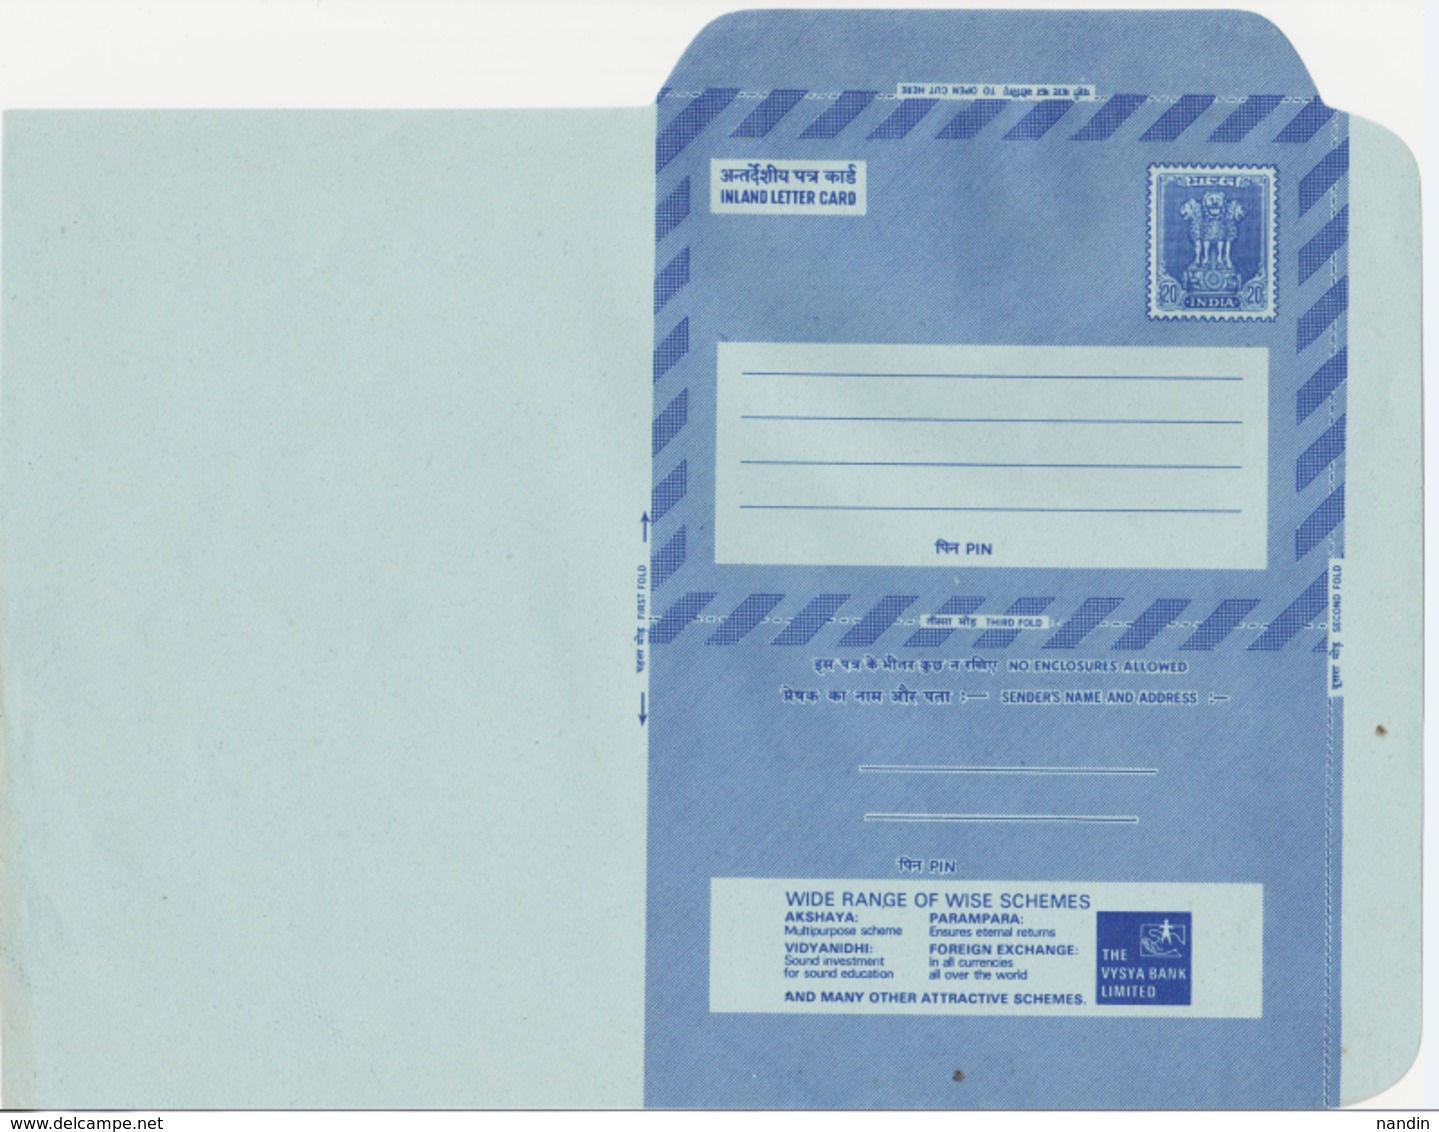 INDIA POSTAL STATIONERY INLAND LETTER CARD.20P ADVERTISE MENT  THE VYSYA BANK LIMITED - Inland Letter Cards